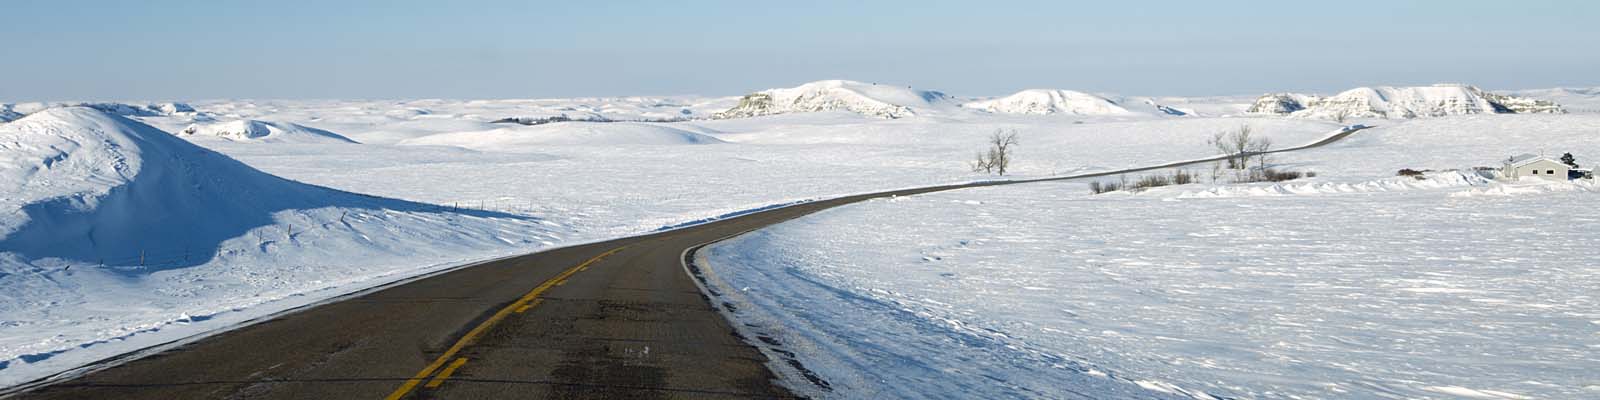 This is an image of a road surrounded by snow in Bismark North Dakota where ASTA-USA provides professional translation services.